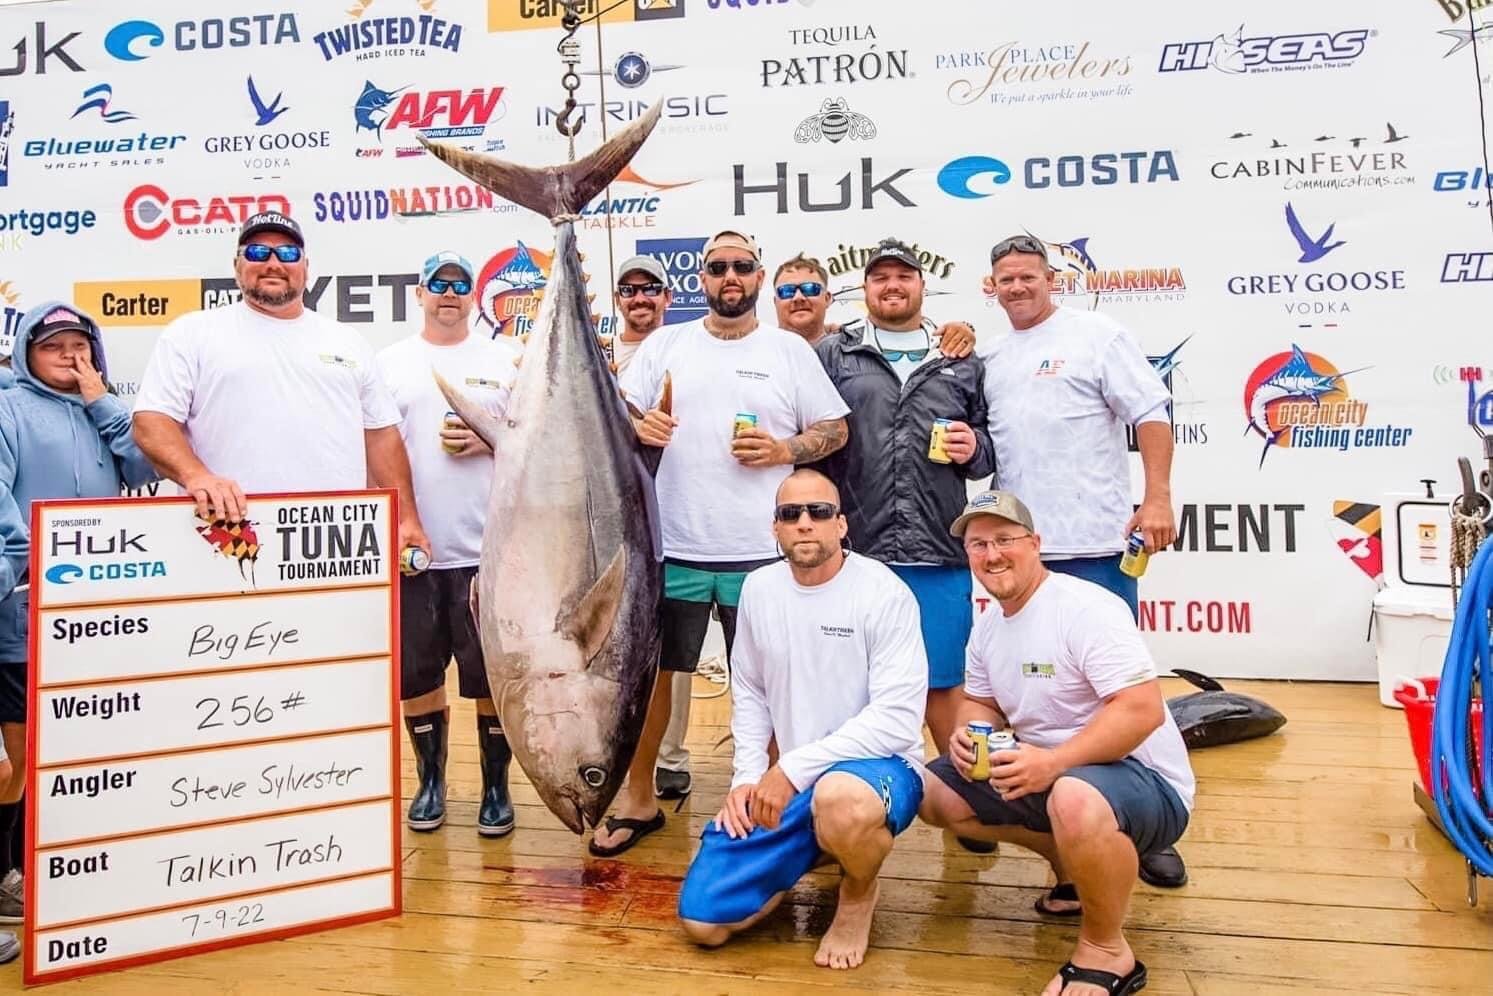 Chris Little (top row, right) captained the Talkin’ Trash crew that placed first in the Heaviest Stringer category and second place in the Single Largest category.